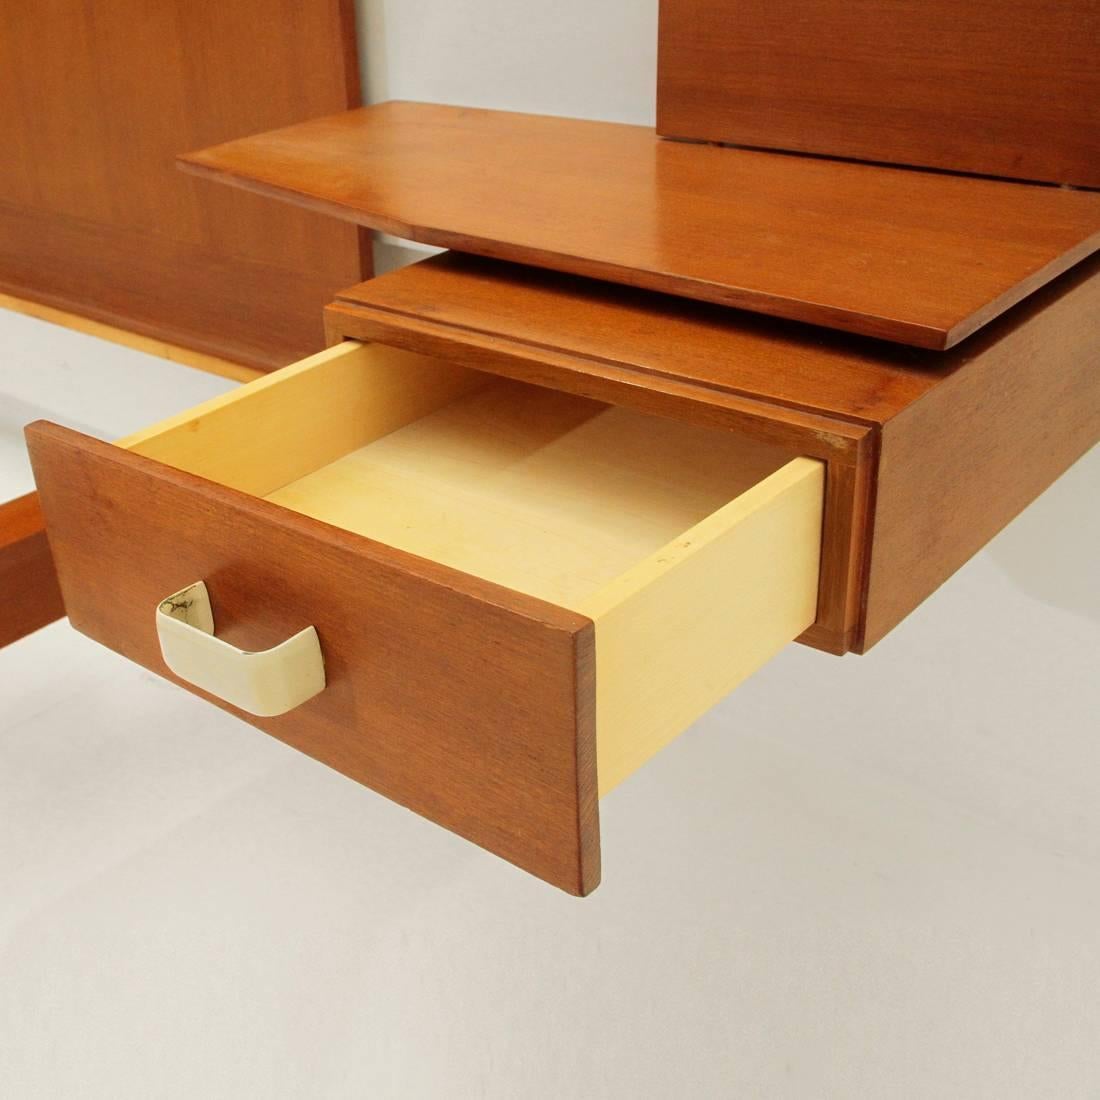 Brass Modernist Bed with Nightstand in Teak by Galleria Mobili d'Arte of Cantù, 1950s